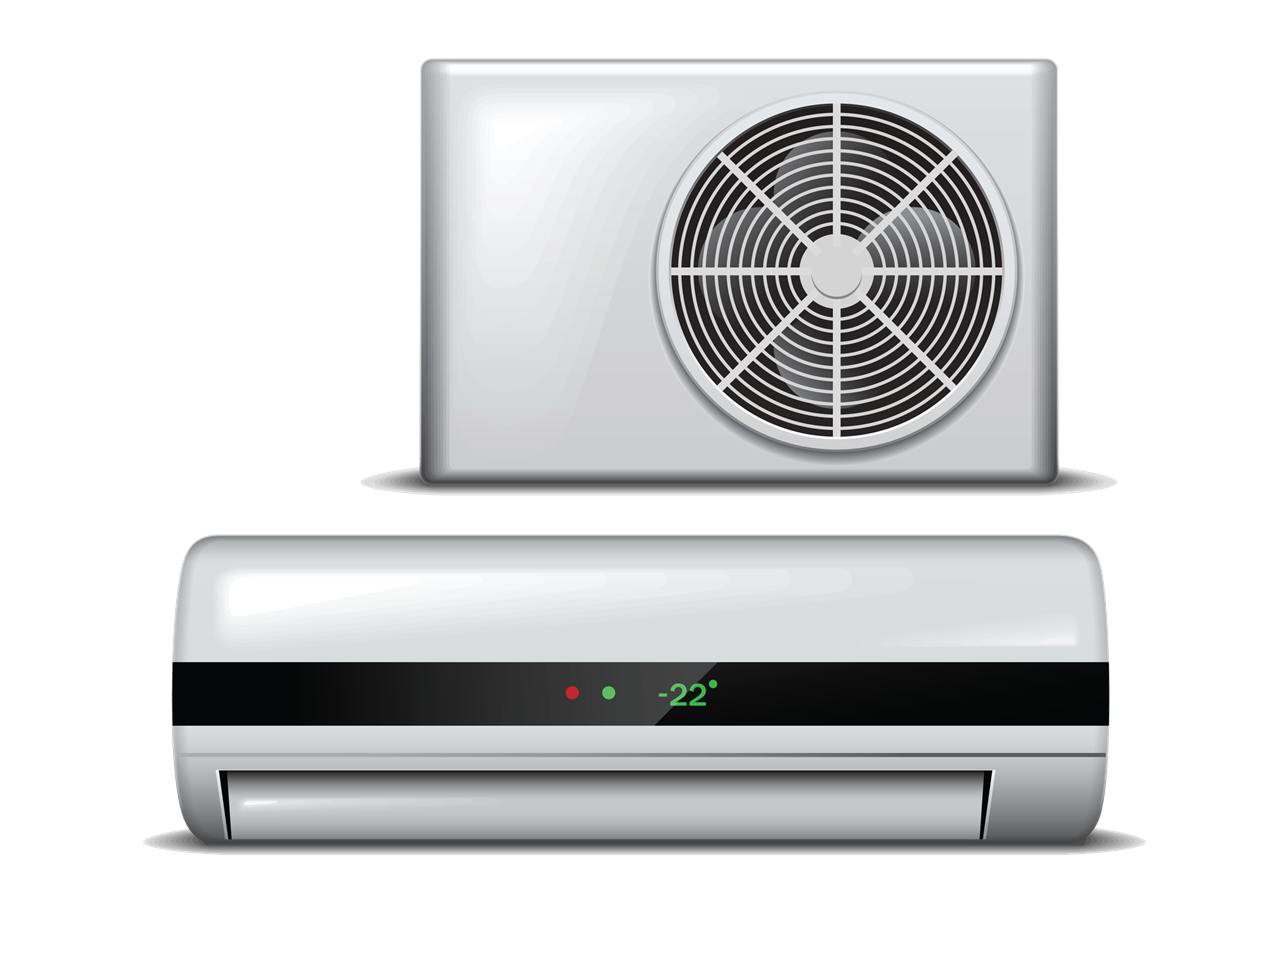 AC - Buy Air Conditioners Online at Best Prices | SATHYA sathya.in